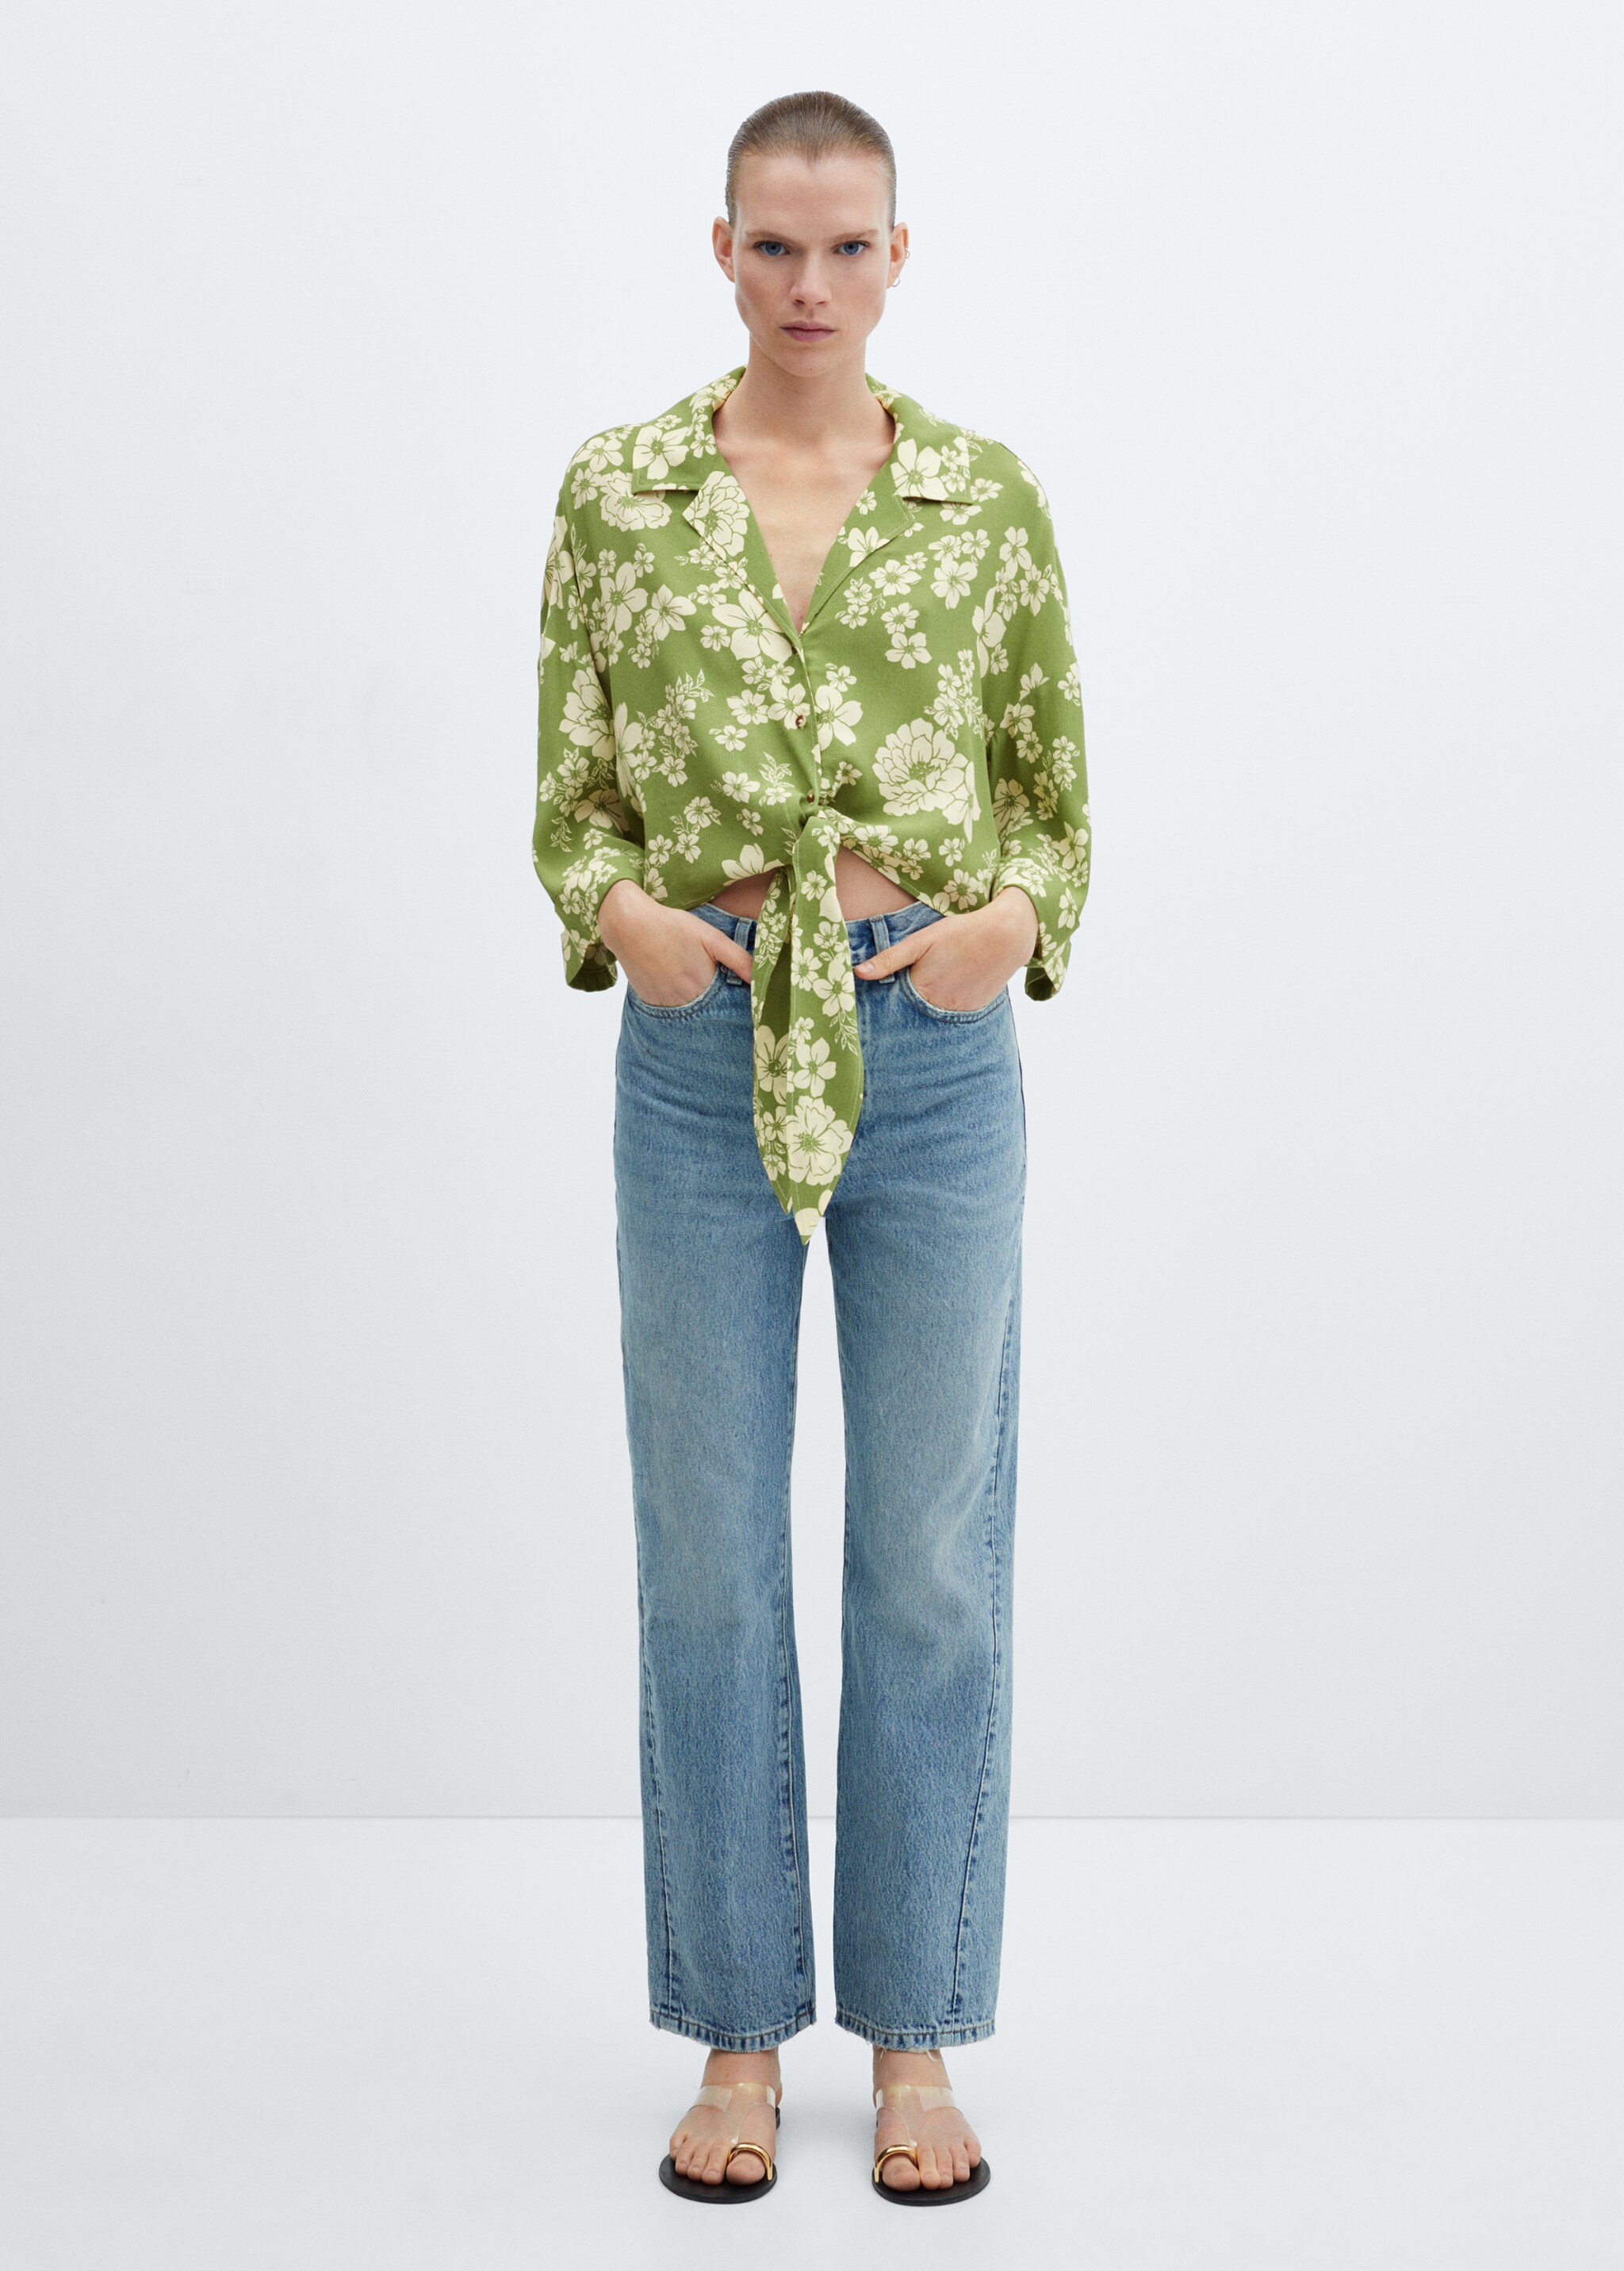 Floral-print shirt with knot detail - General plane